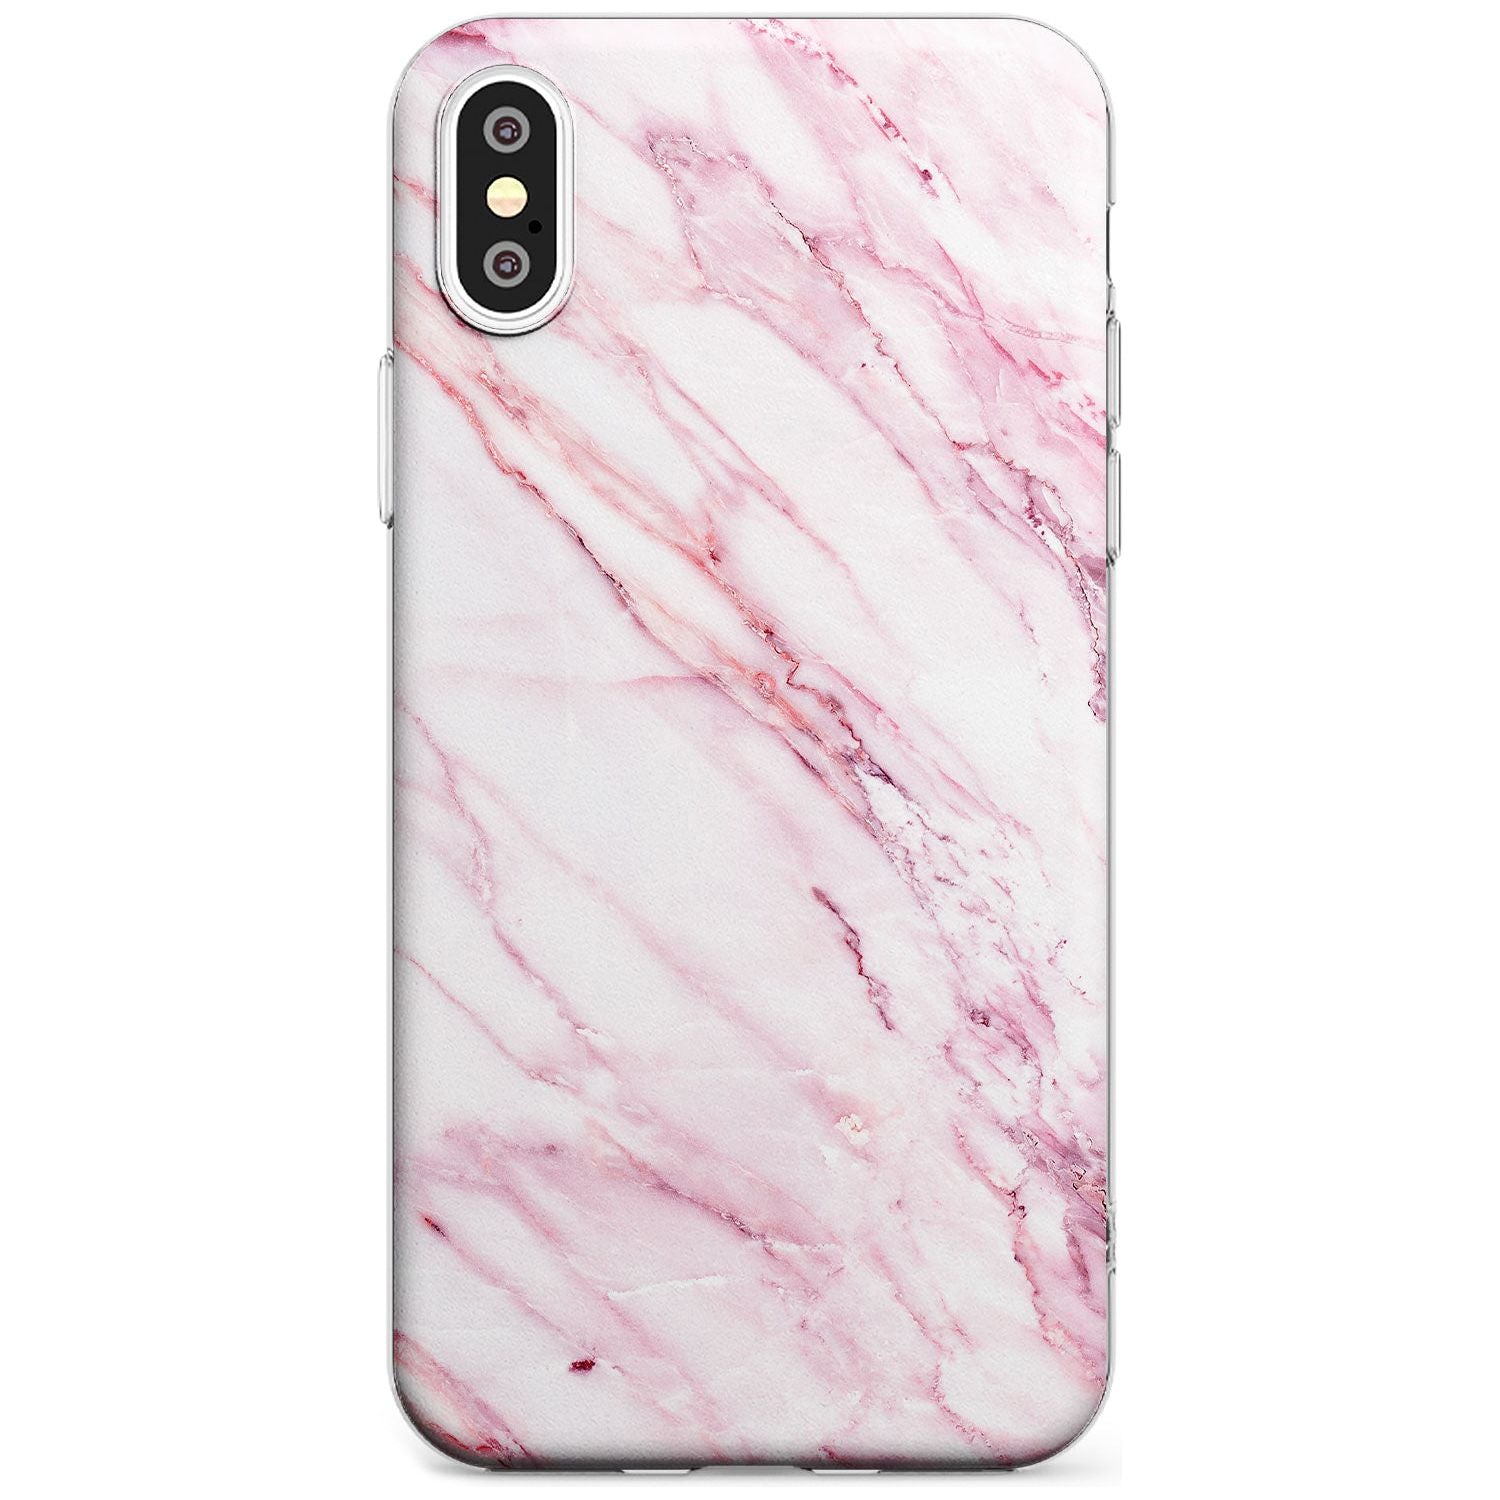 White & Pink Onyx Marble Texture Black Impact Phone Case for iPhone X XS Max XR